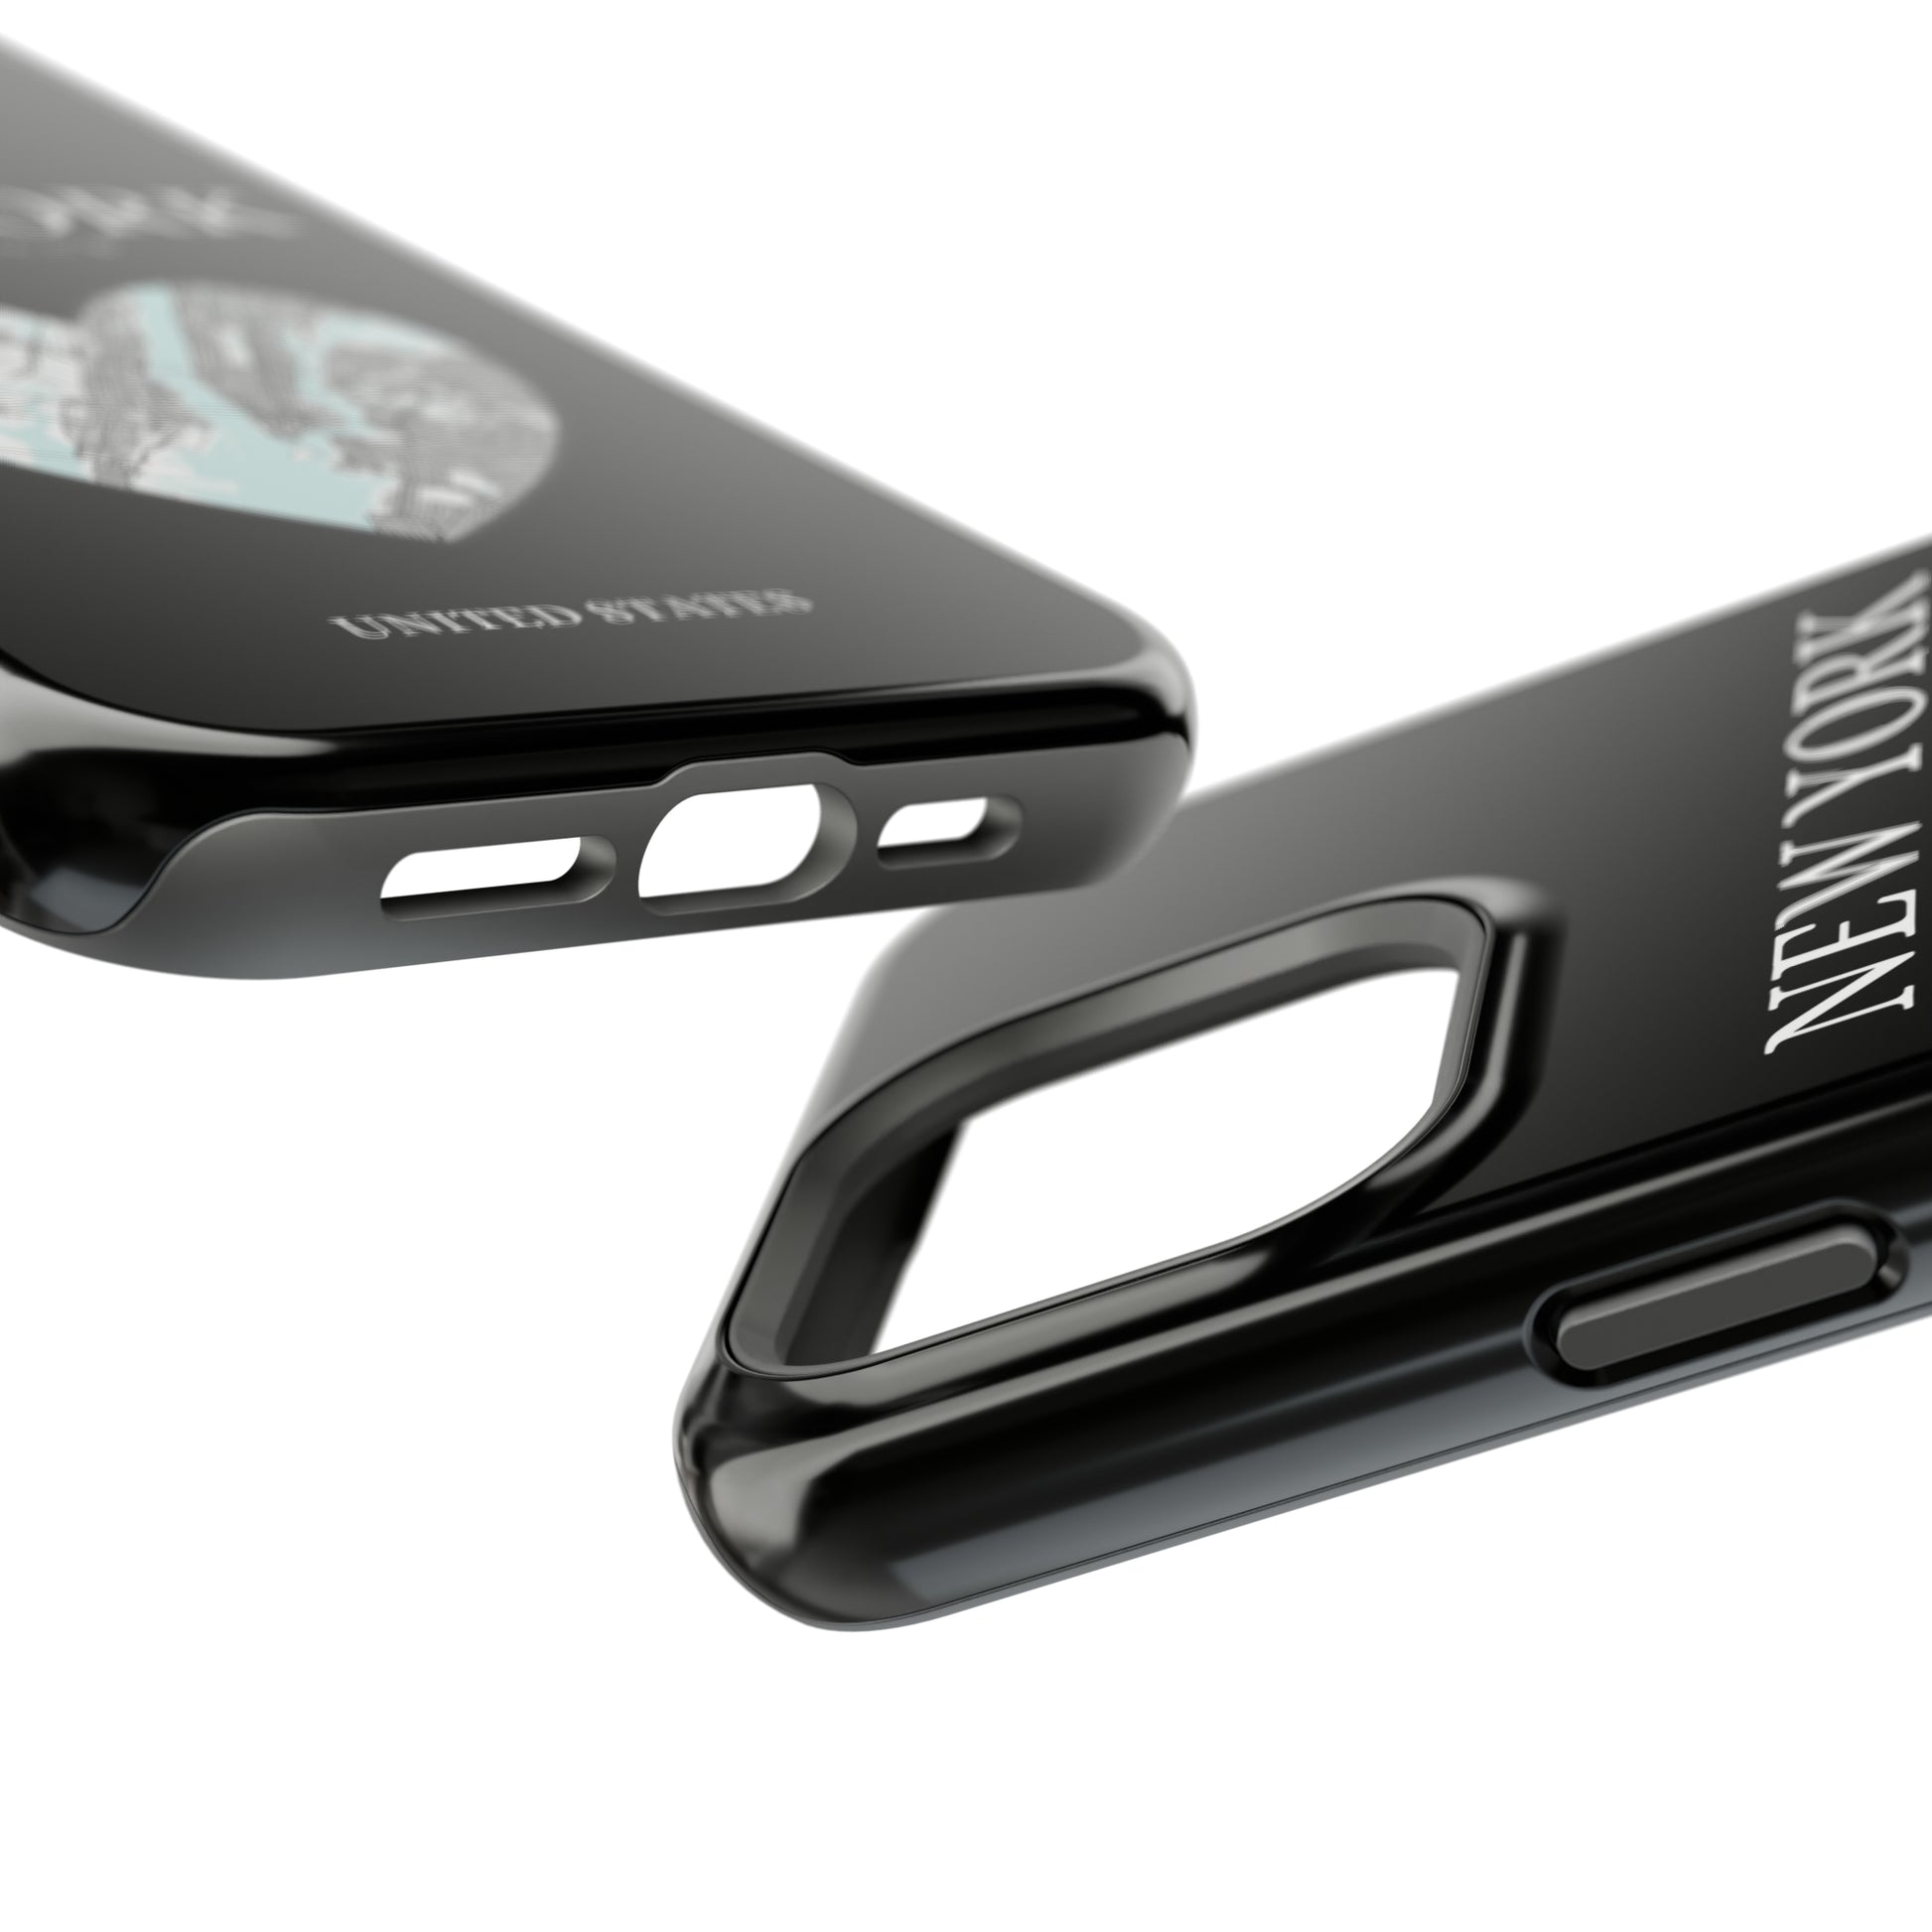 Elevate your iPhone's style with the New York Heartbeat Black MagSafe Case, offering robust protection, MagSafe compatibility, and a choice of matte or glossy finish-York Heartbeat - Black (iPhone MagSafe Case)